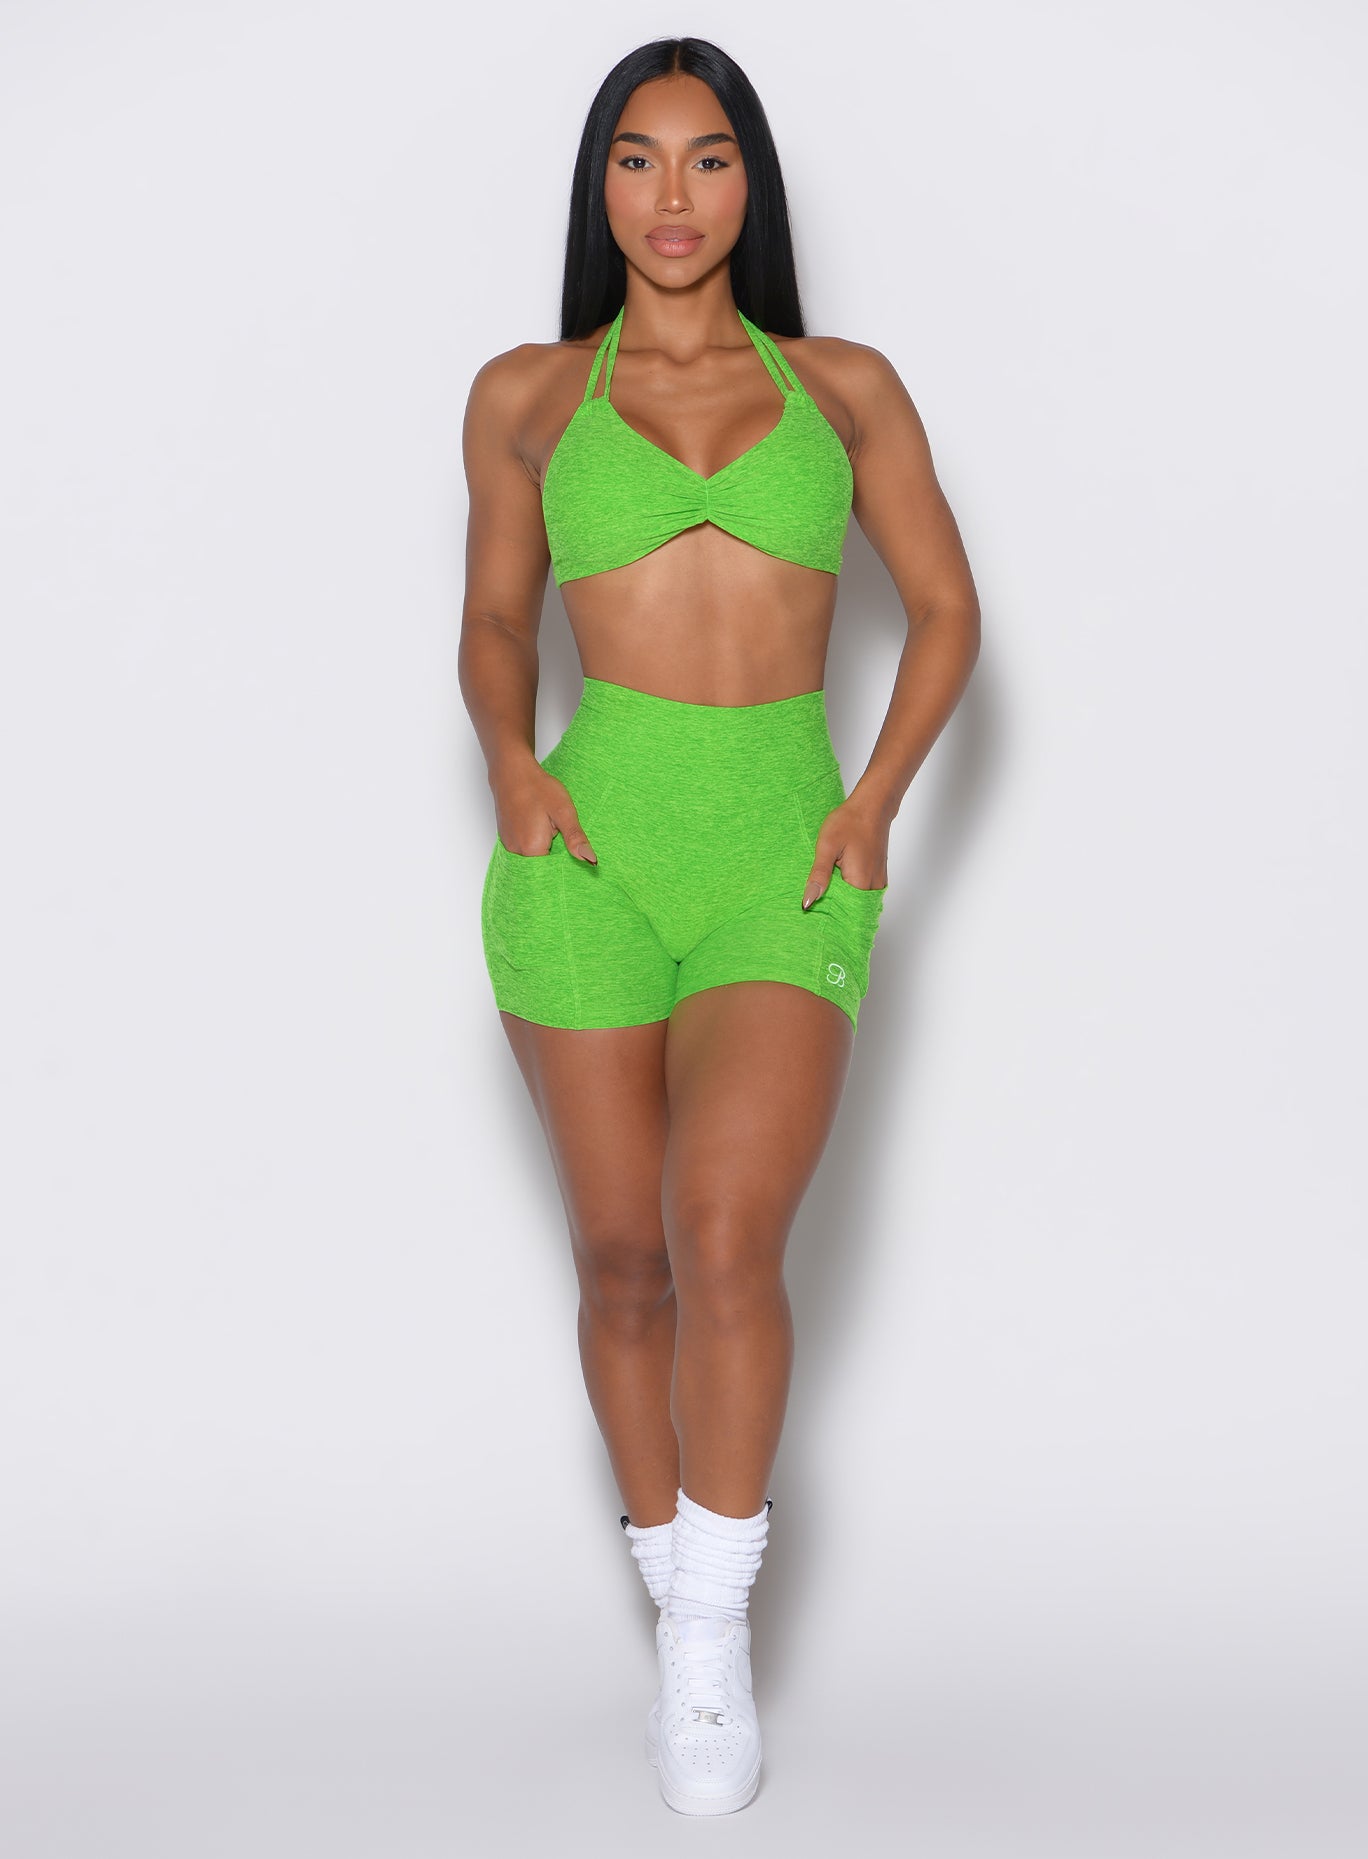 front profile view of a model wearing our V back shorts in Neon Lime Green color along with the matching bra